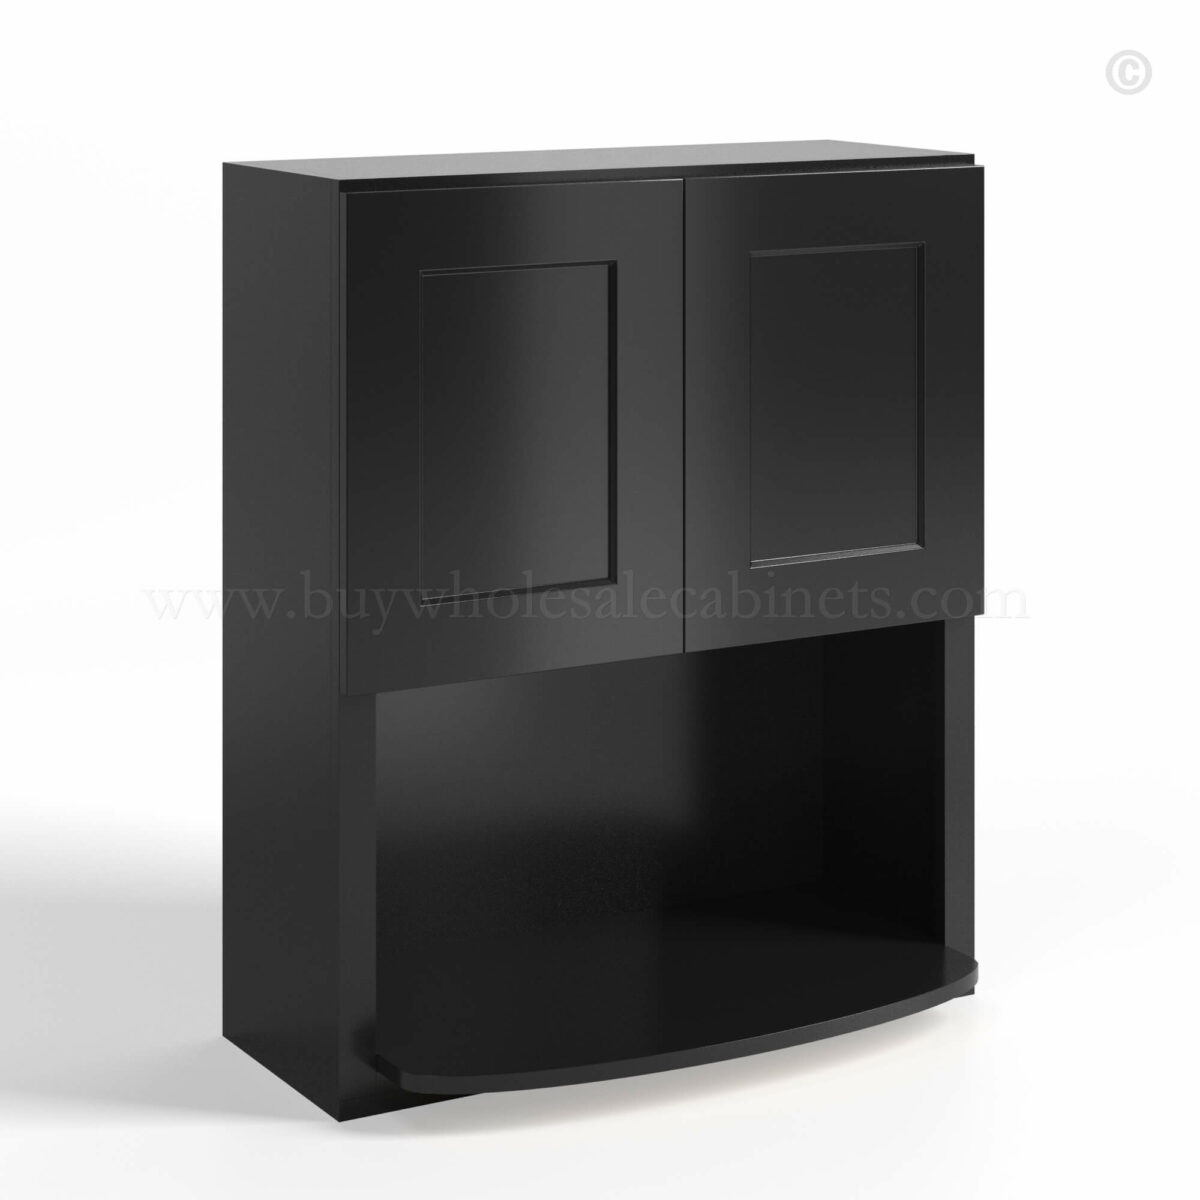 Black Shaker Wall Microwave Cabinet, rta cabinets, wholesale cabinets